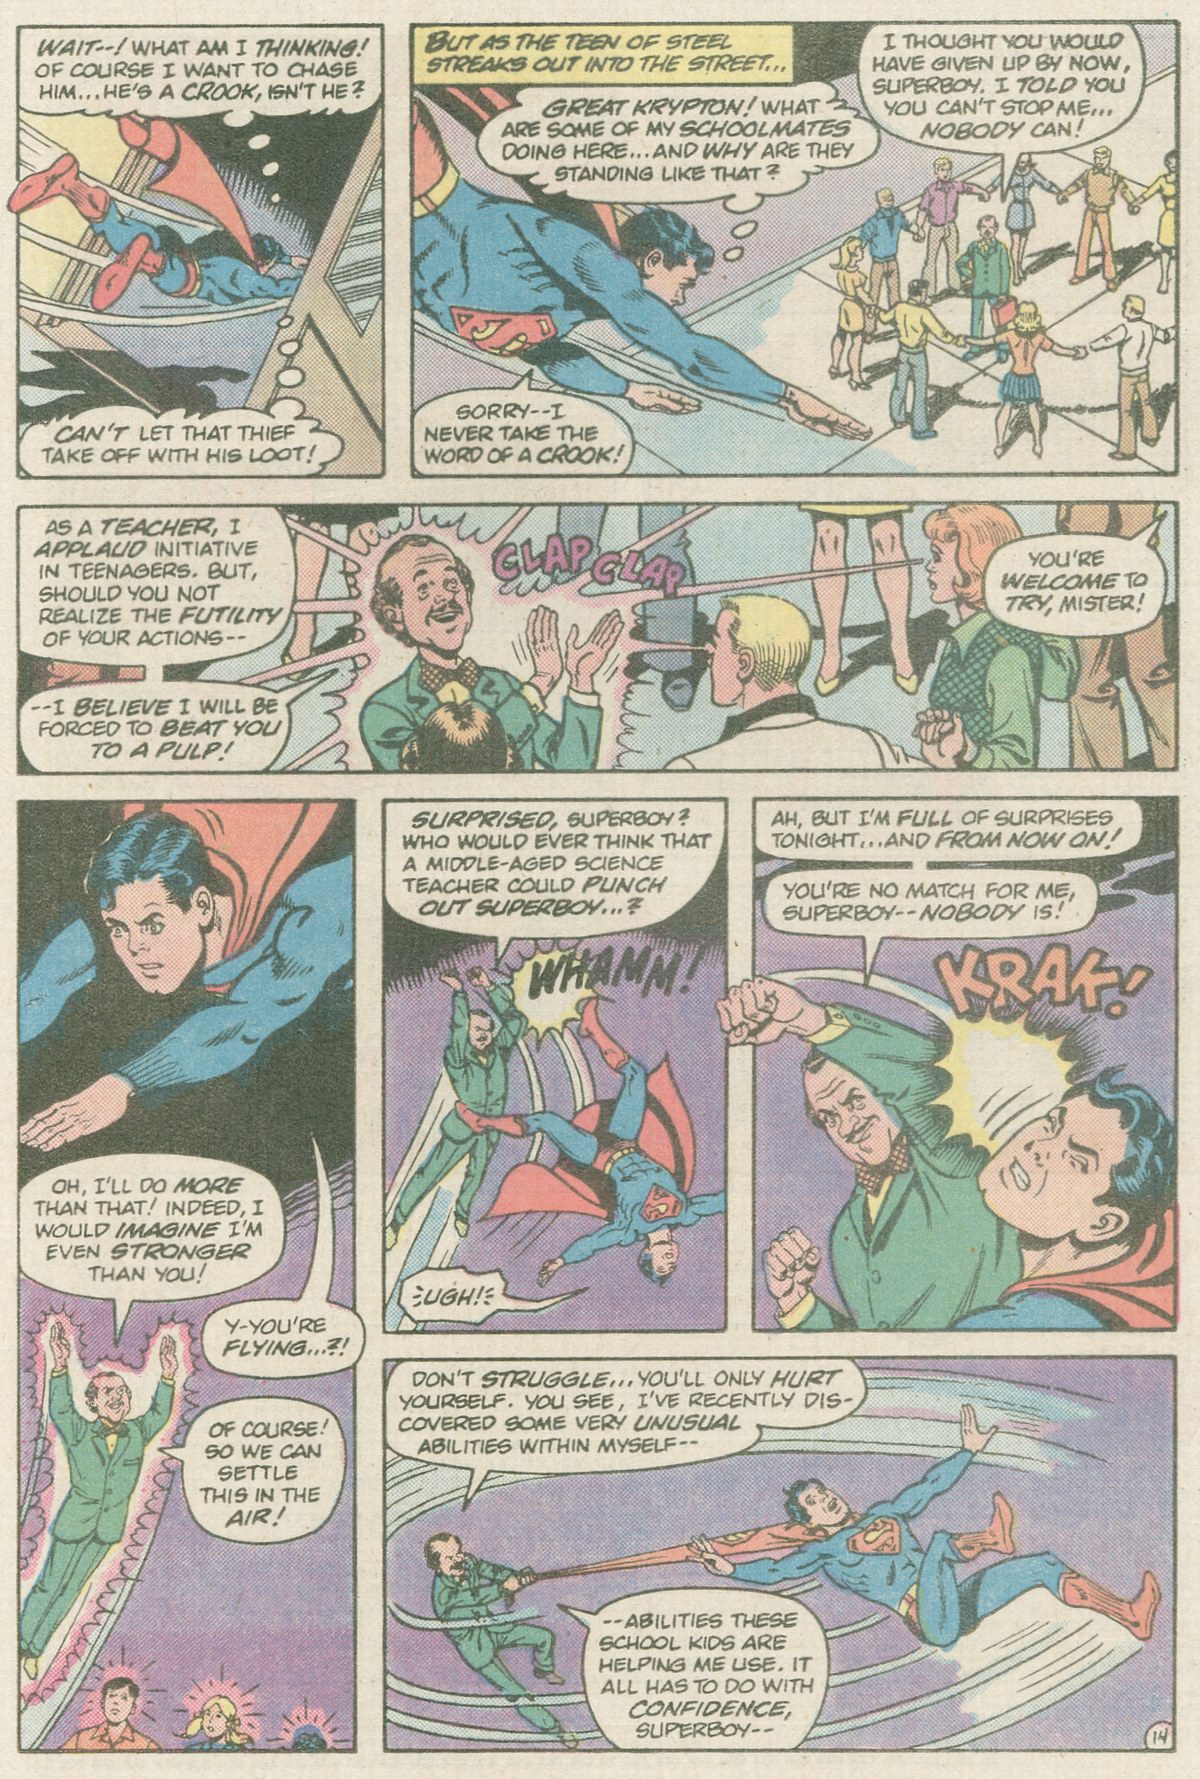 The New Adventures of Superboy 36 Page 14